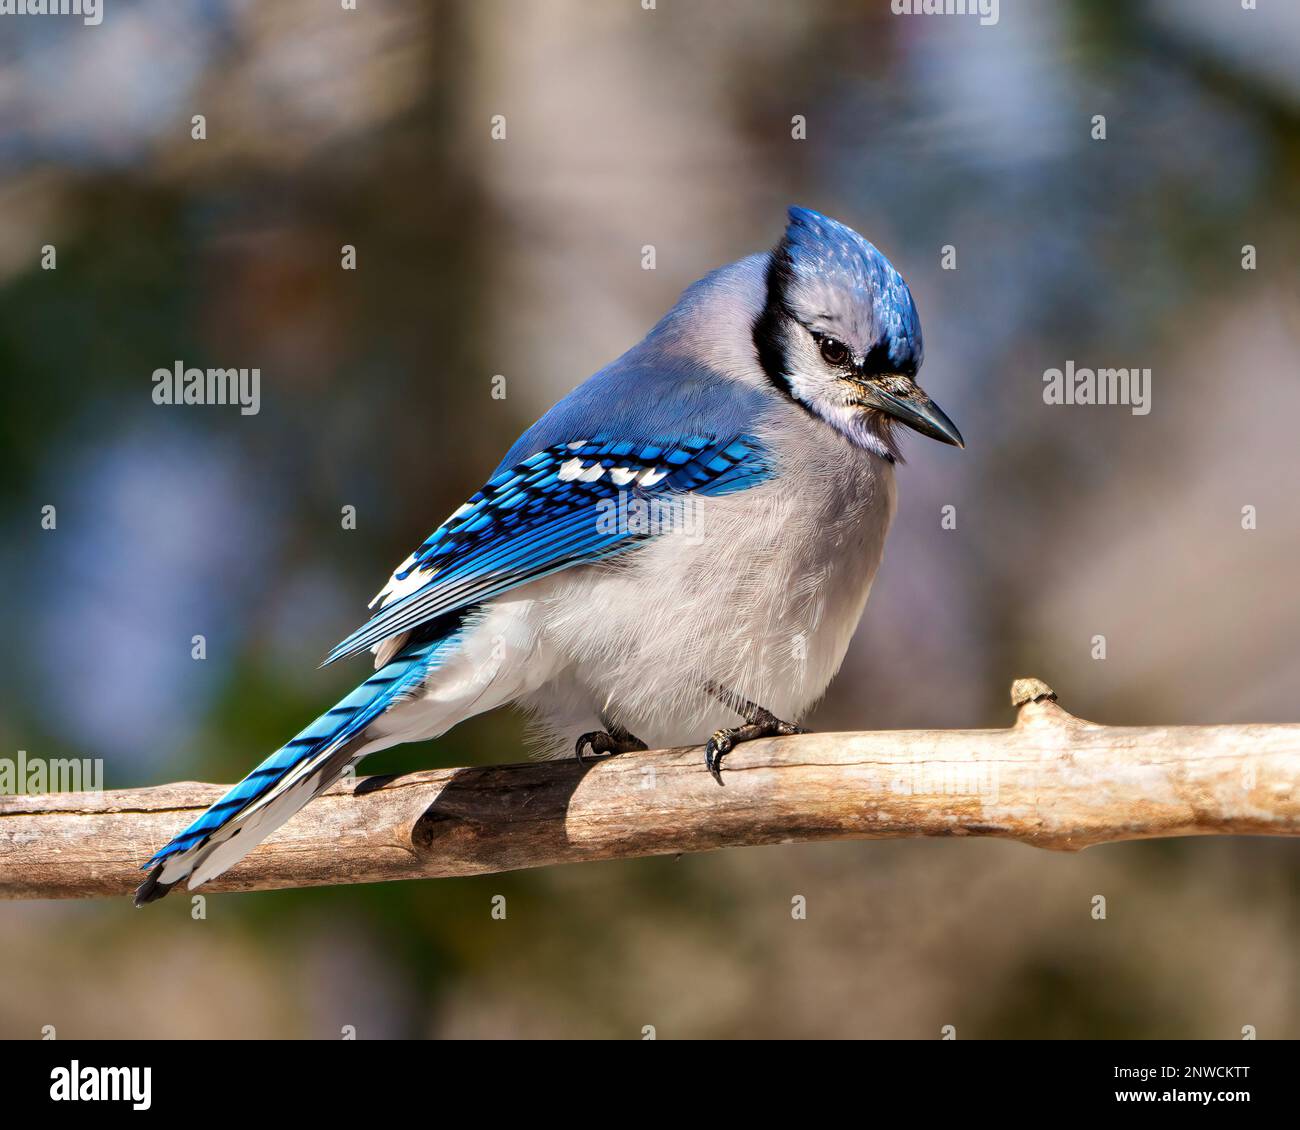 Blue Jay close-up side view, perched on a tree branch with blur background in its environment and habitat surrounding. Jay picture. Jay Portrait. Stock Photo